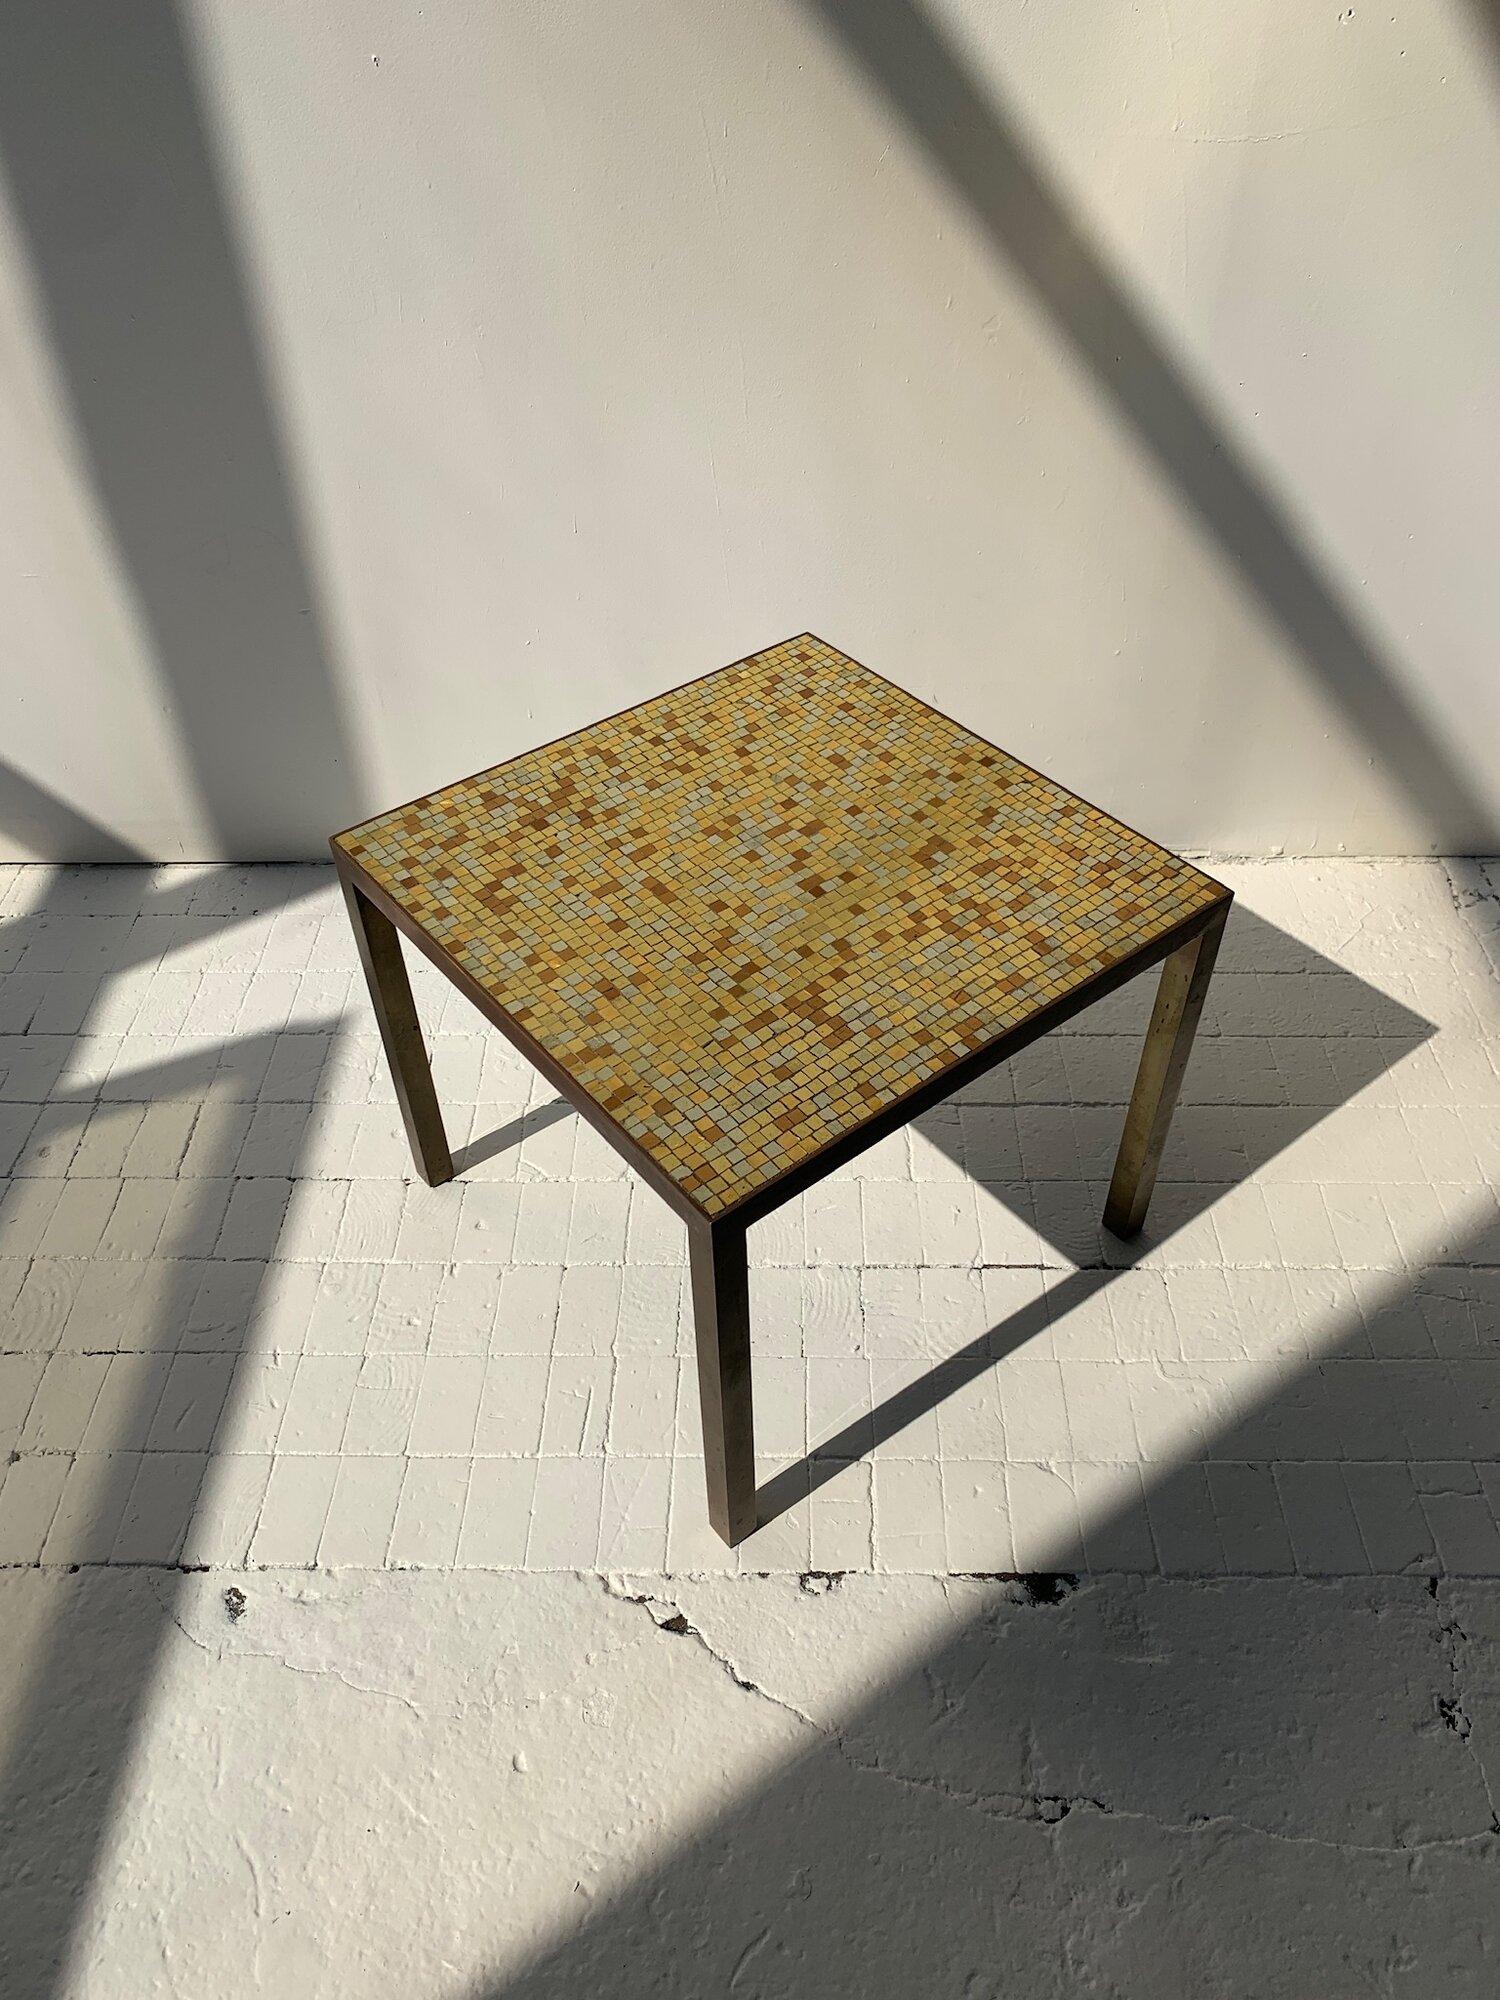 Vintage Hollywood Regency Brass Frame and Glass Metallic Mosaic Tile Tables, Circa 1960s. Beautiful geometric foiled glass mosaic tiles in tones of bronze, silver and gold. Expertly crafted brass frame.

**One table available.

Specs: 18 1/8” L  18